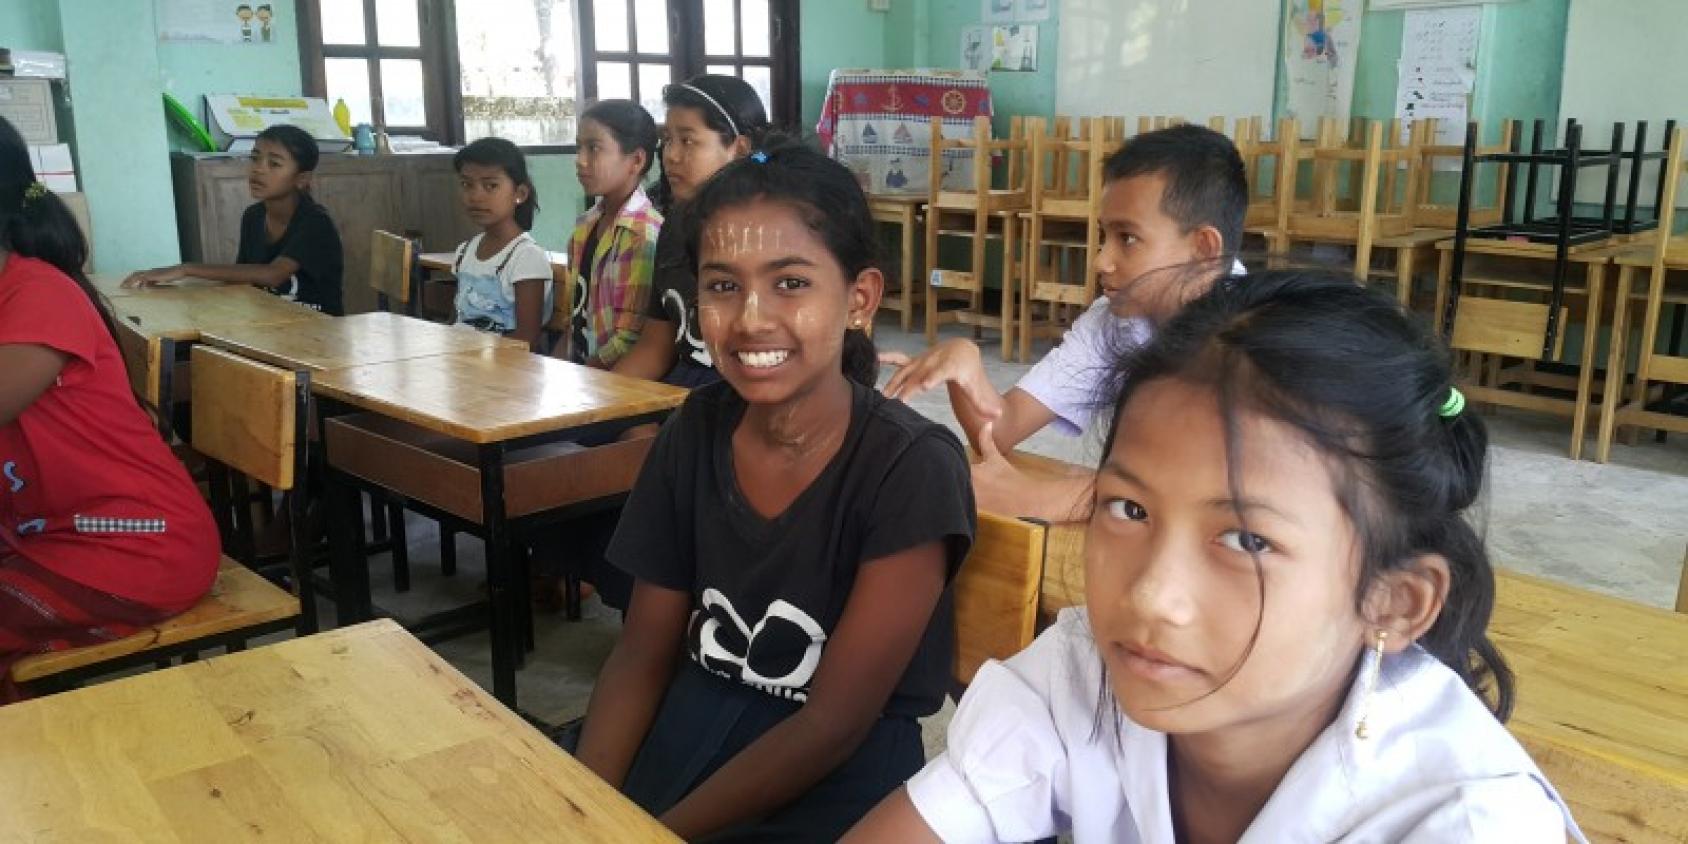 Girls smile at the camera in a classroom. 